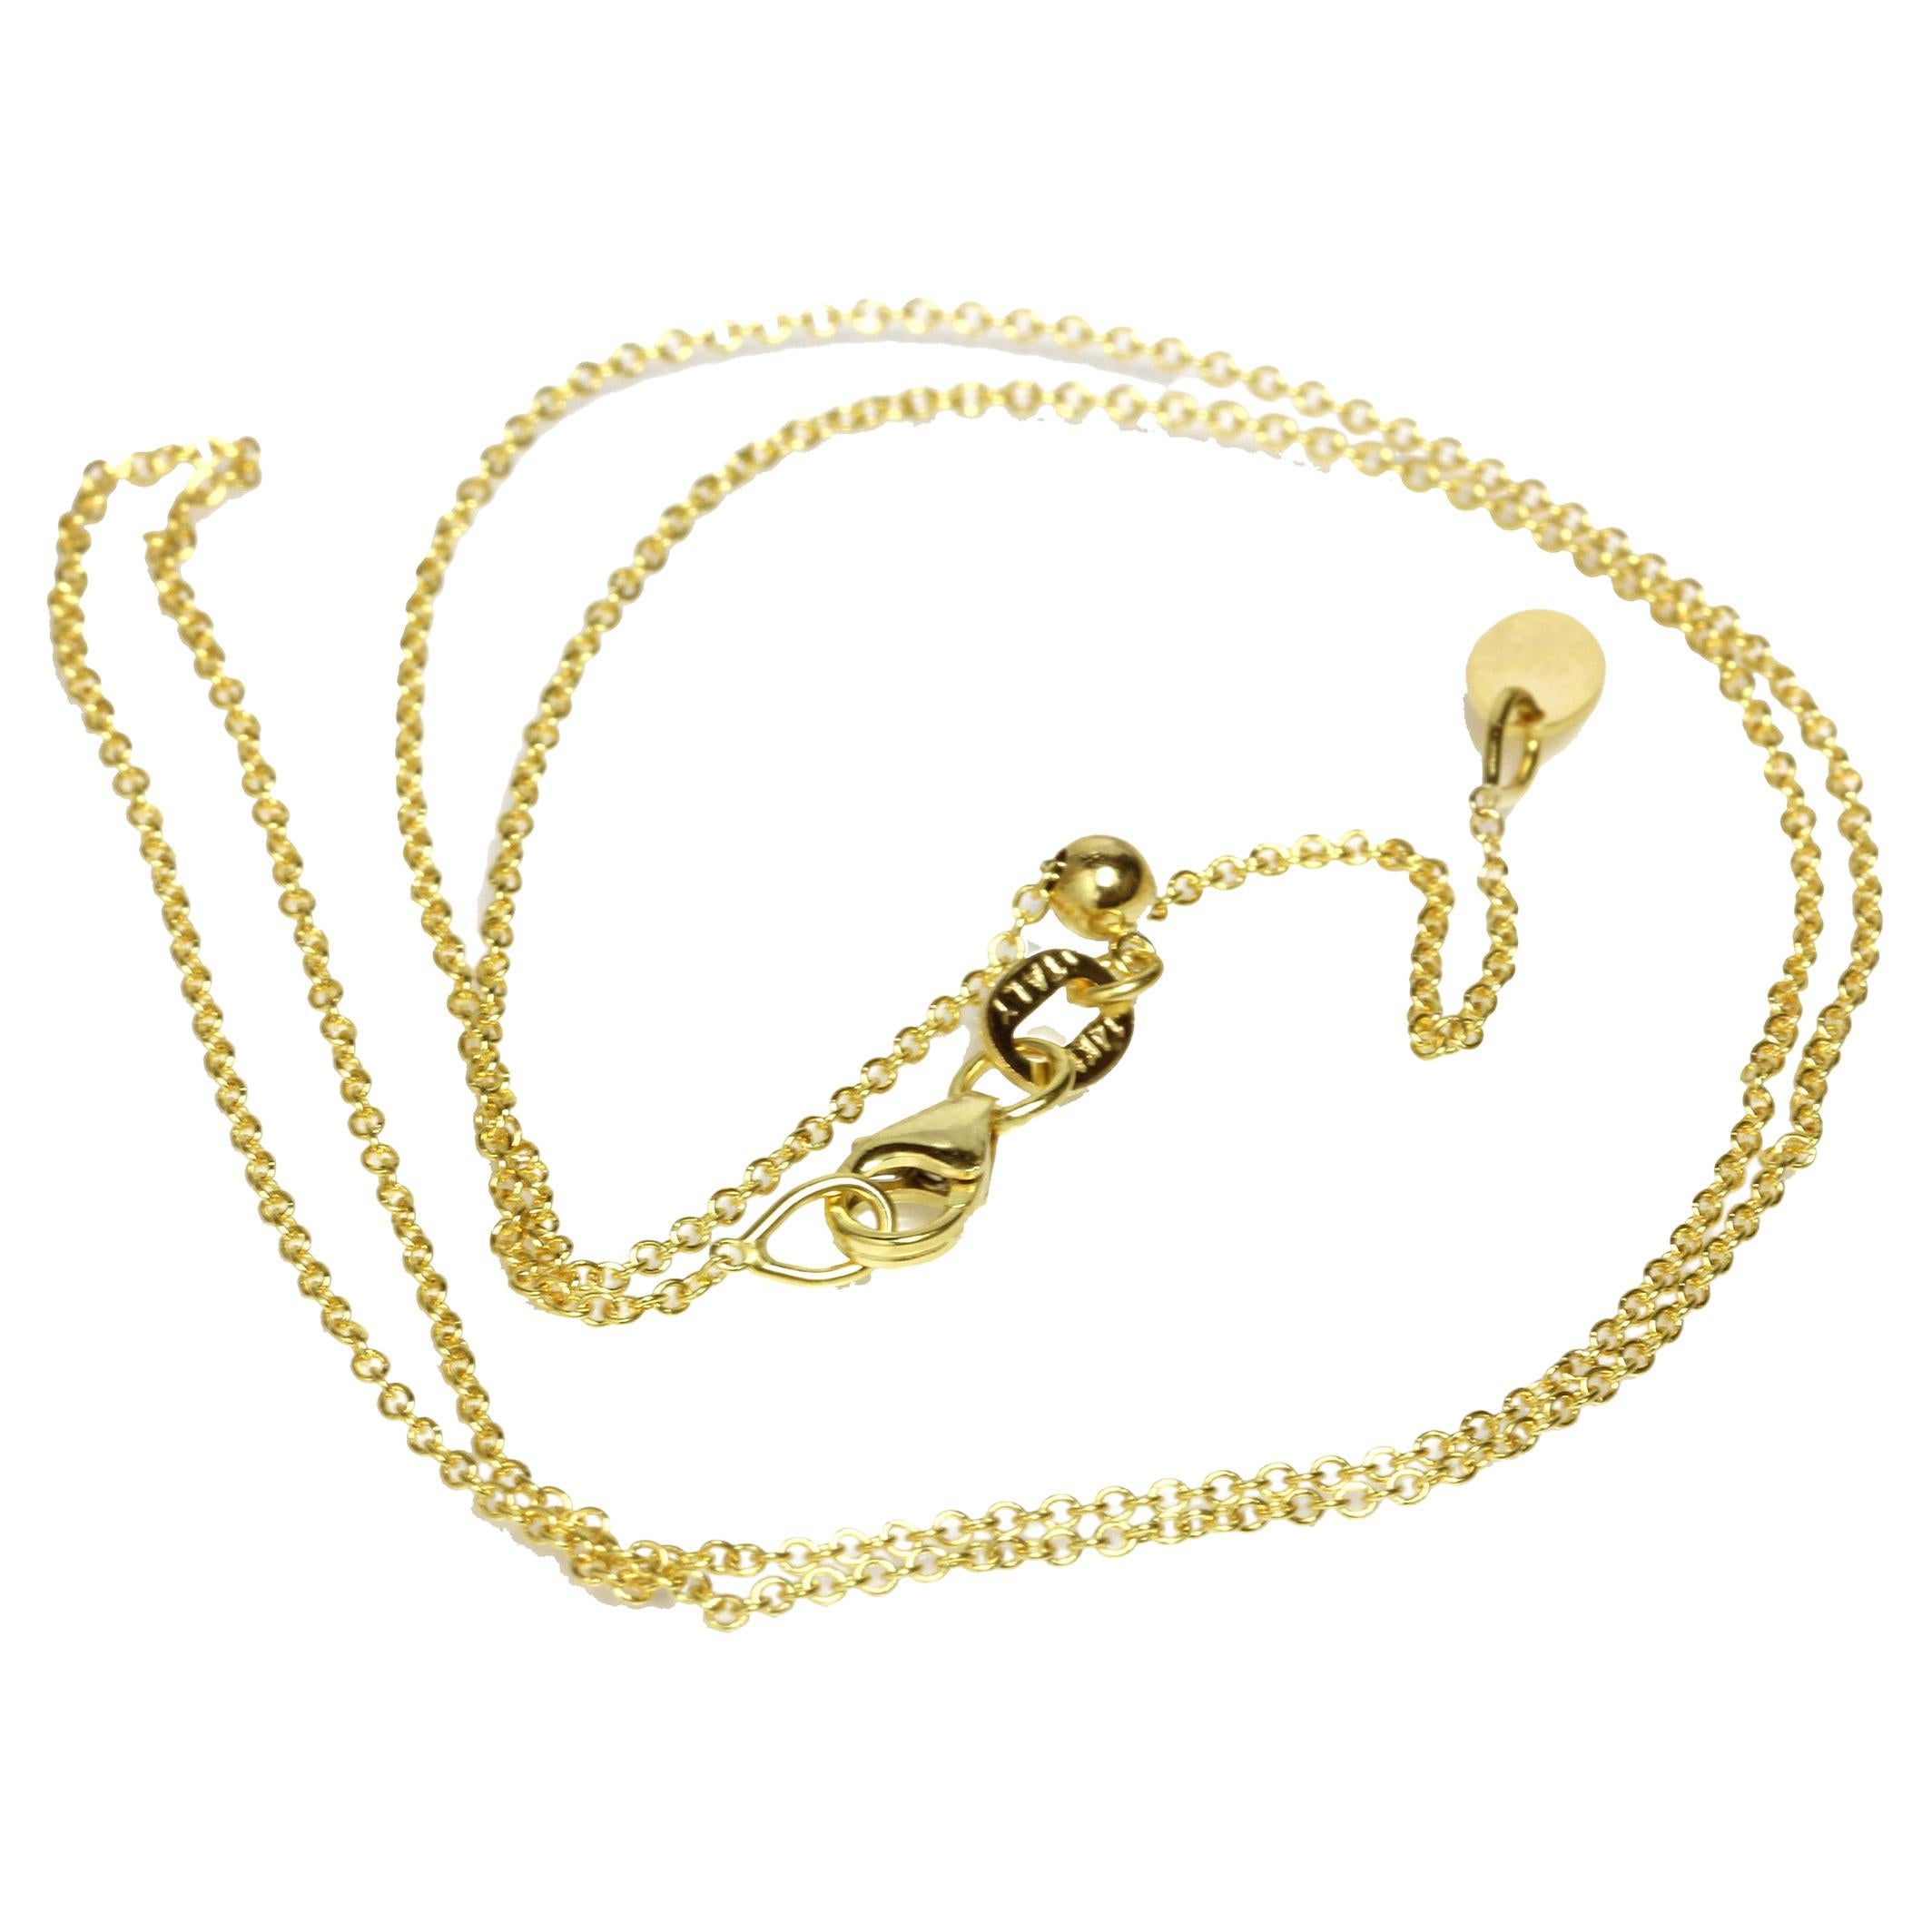 14kt Yellow Gold ADJUSTABLE Chain 24"  Easy slide & adjust to Any Shorter Length For Sale